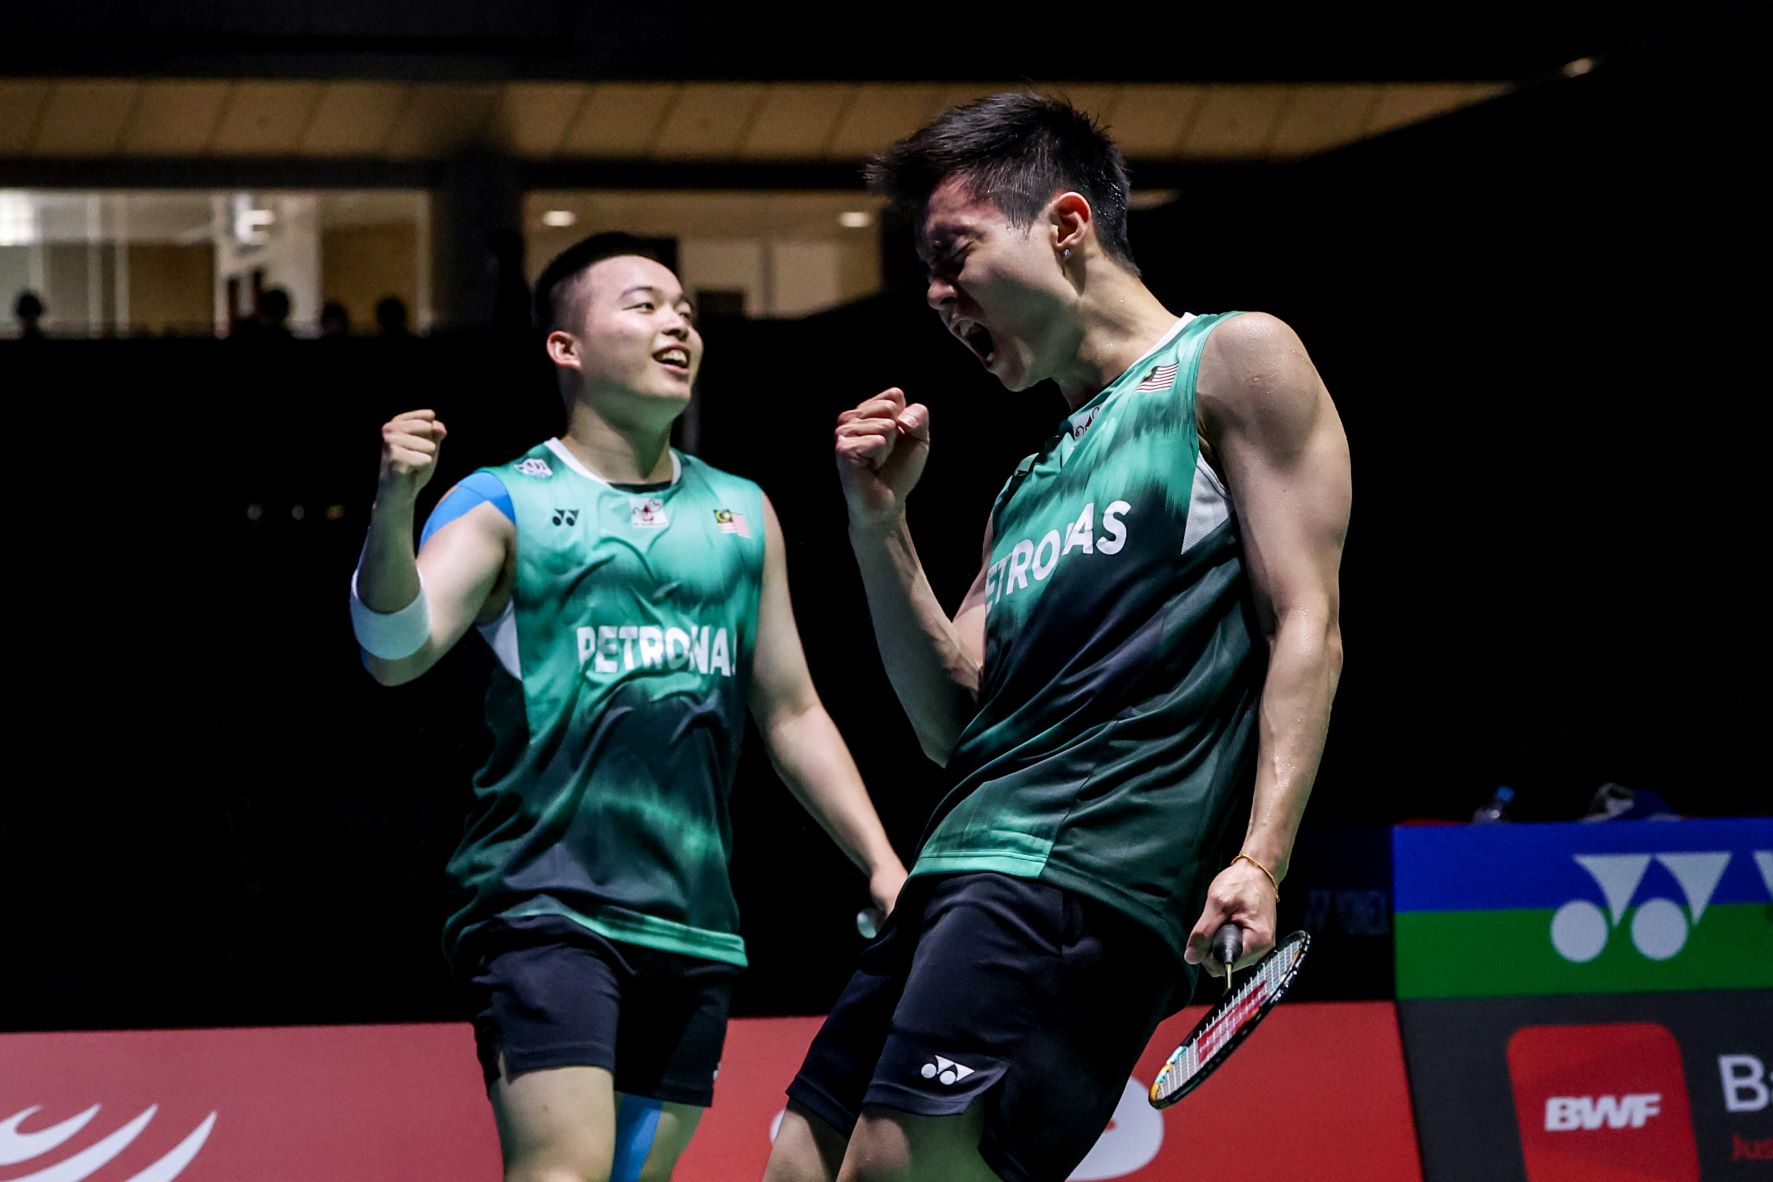 Big moment for our families” Aaron-Wooi Yik praised over intl badminton victory